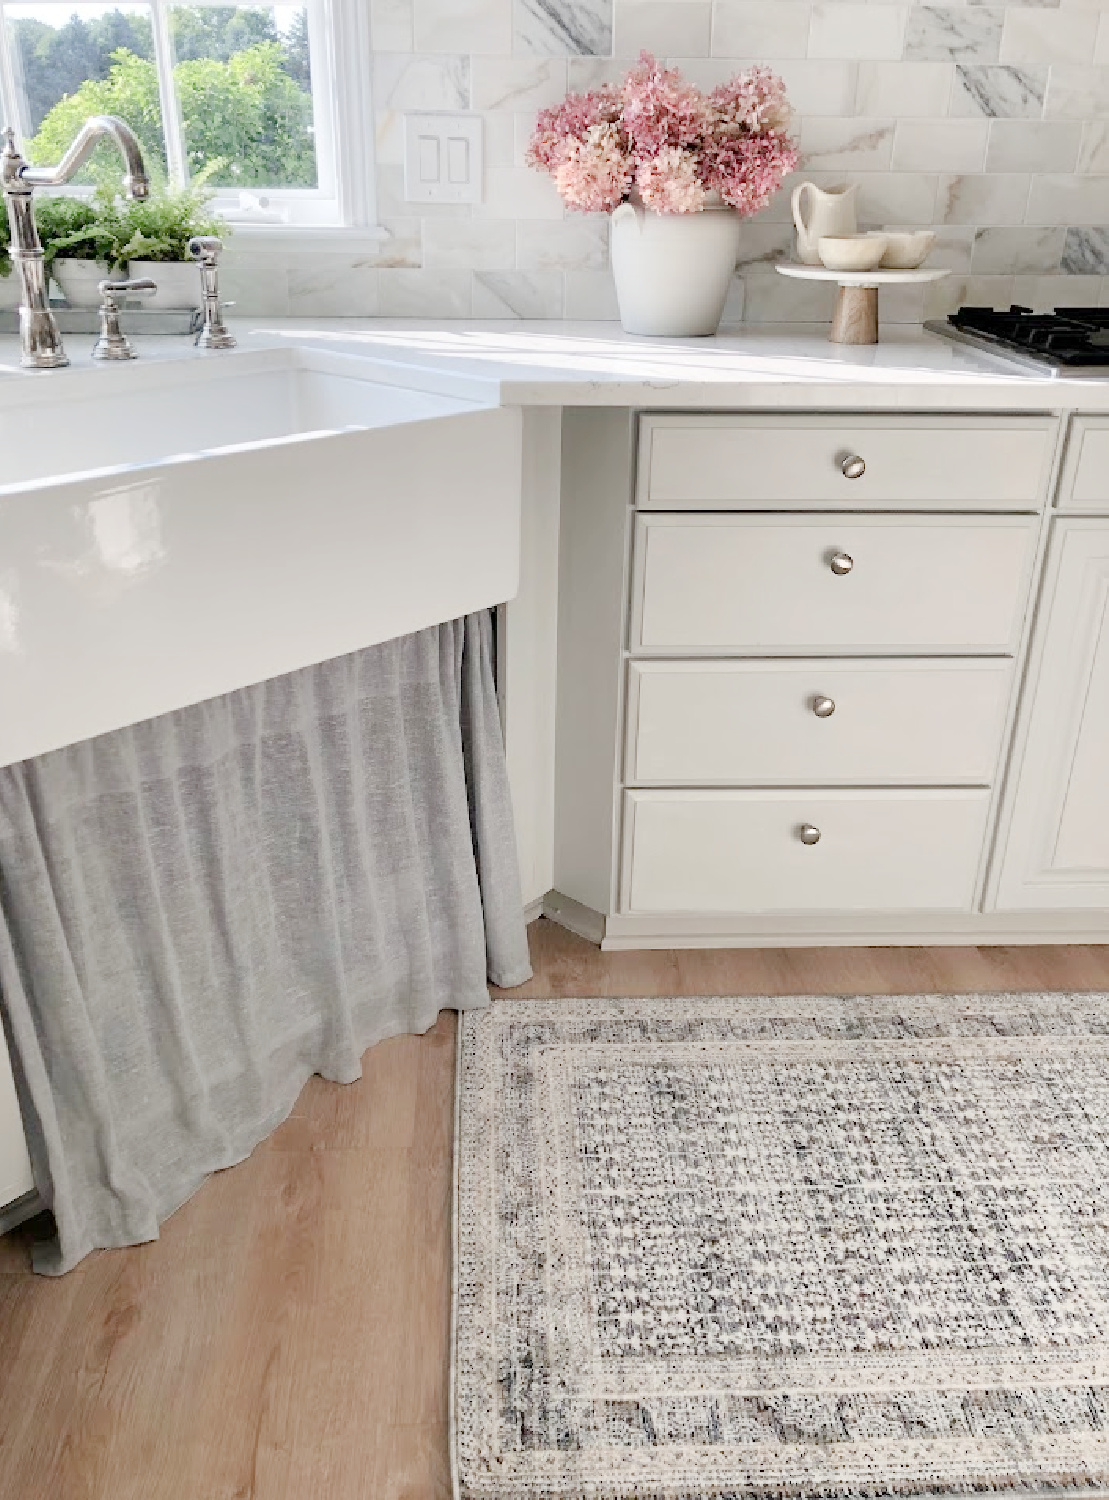 Farm sink with skirted sink base and Loloi x Amber Lewis Zuma rug (ocean) in my modern French kitchen - Hello Lovely Studio.